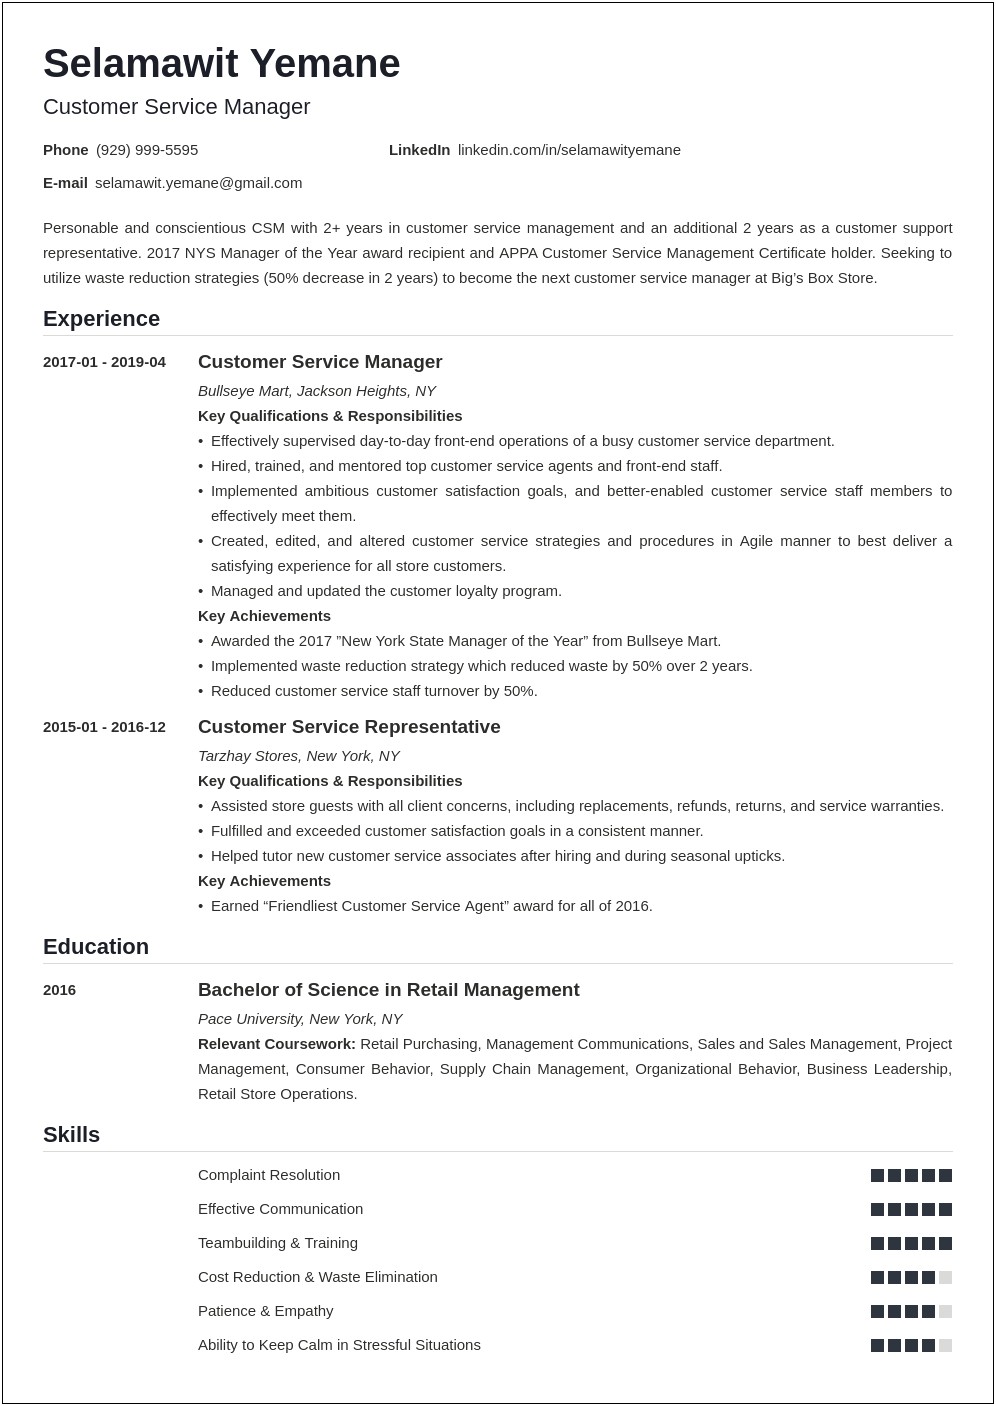 Excellent Customer Service Manager Resume